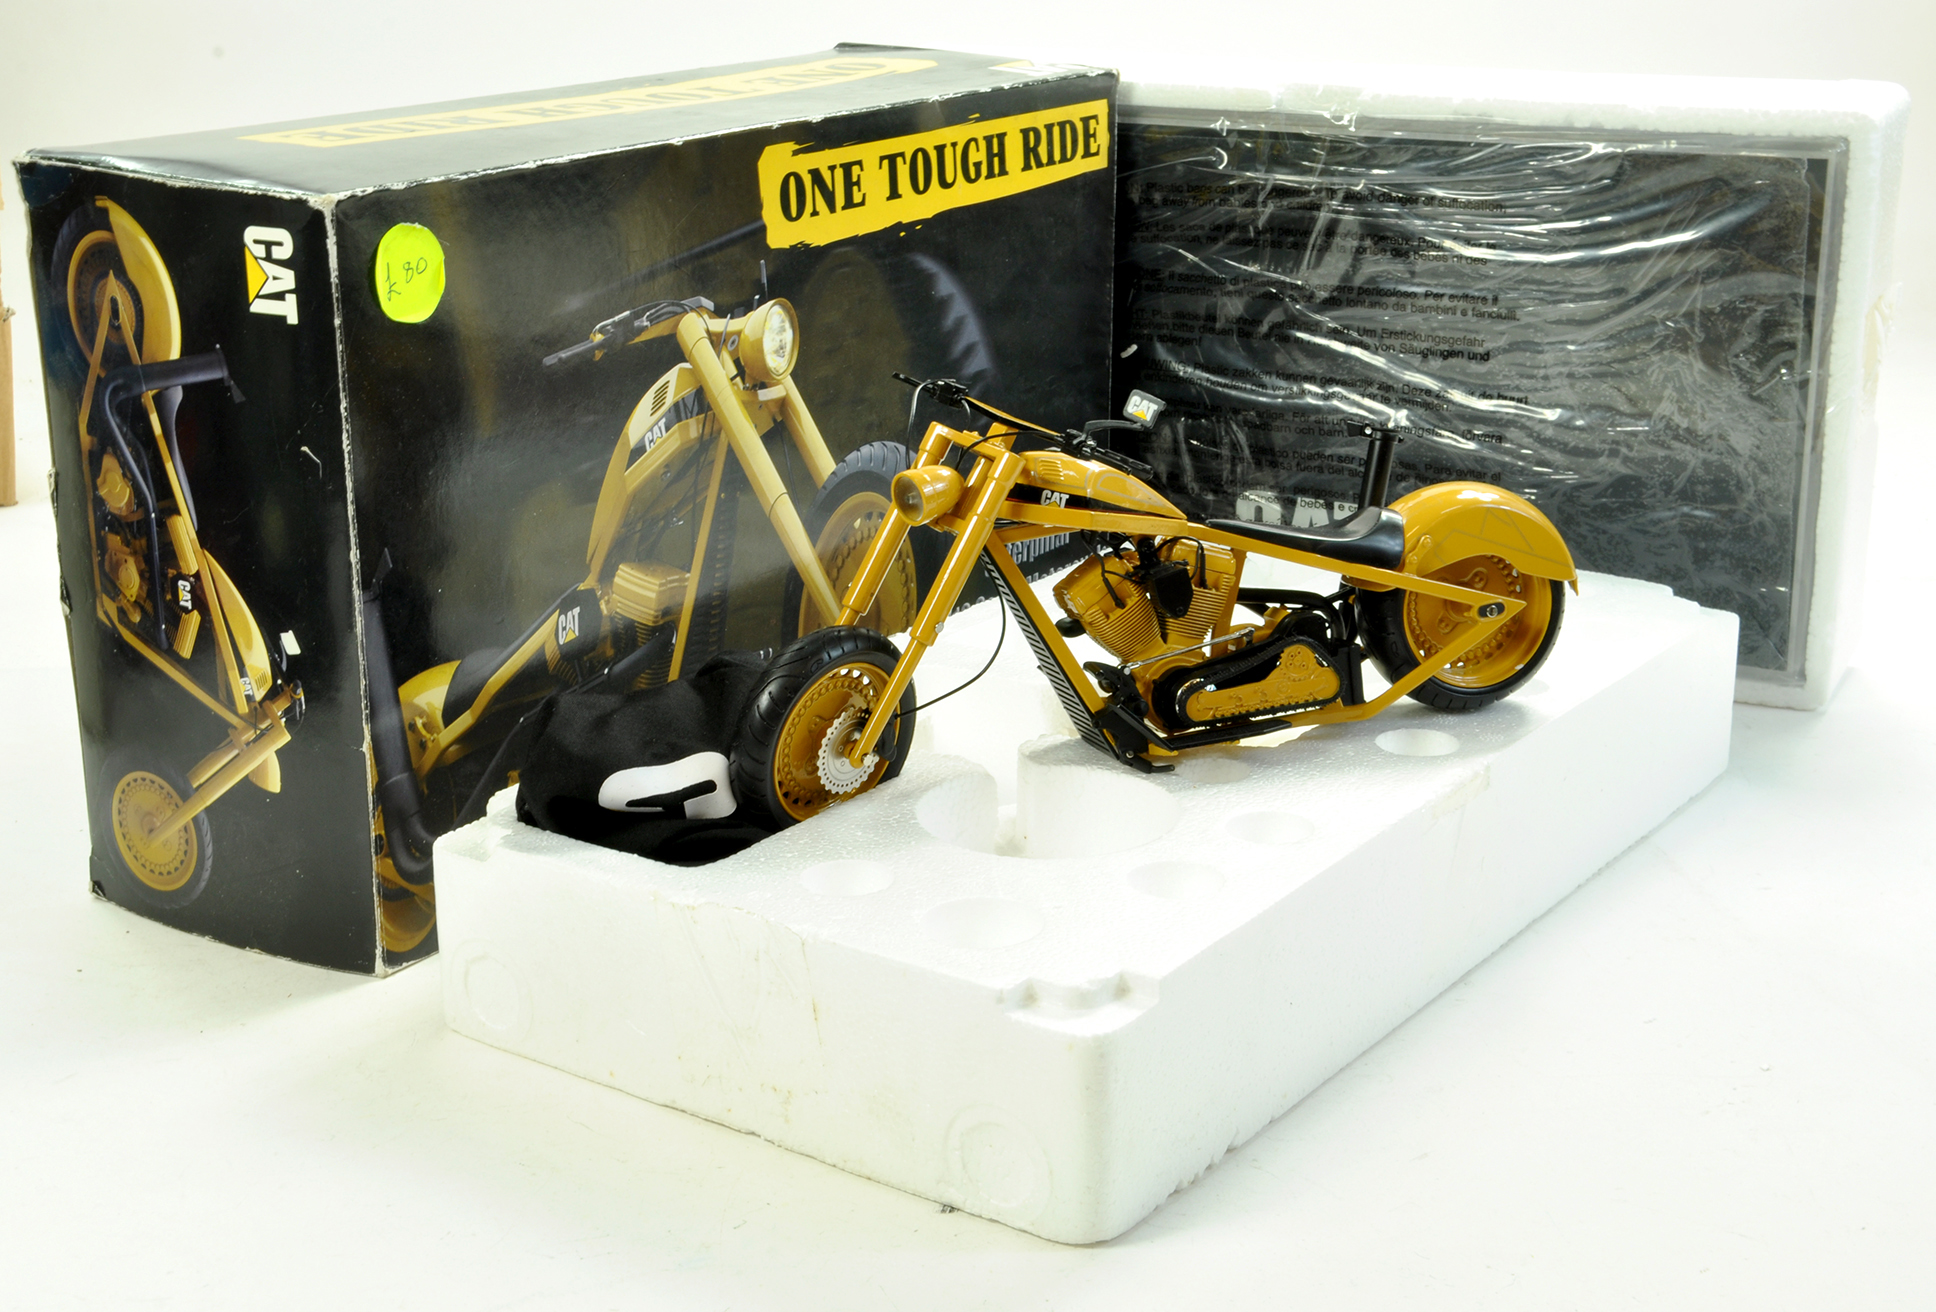 Impressive Large CAT Diecast One Tough Ride Motorcycle. Excellent with Box. Enhanced Condition